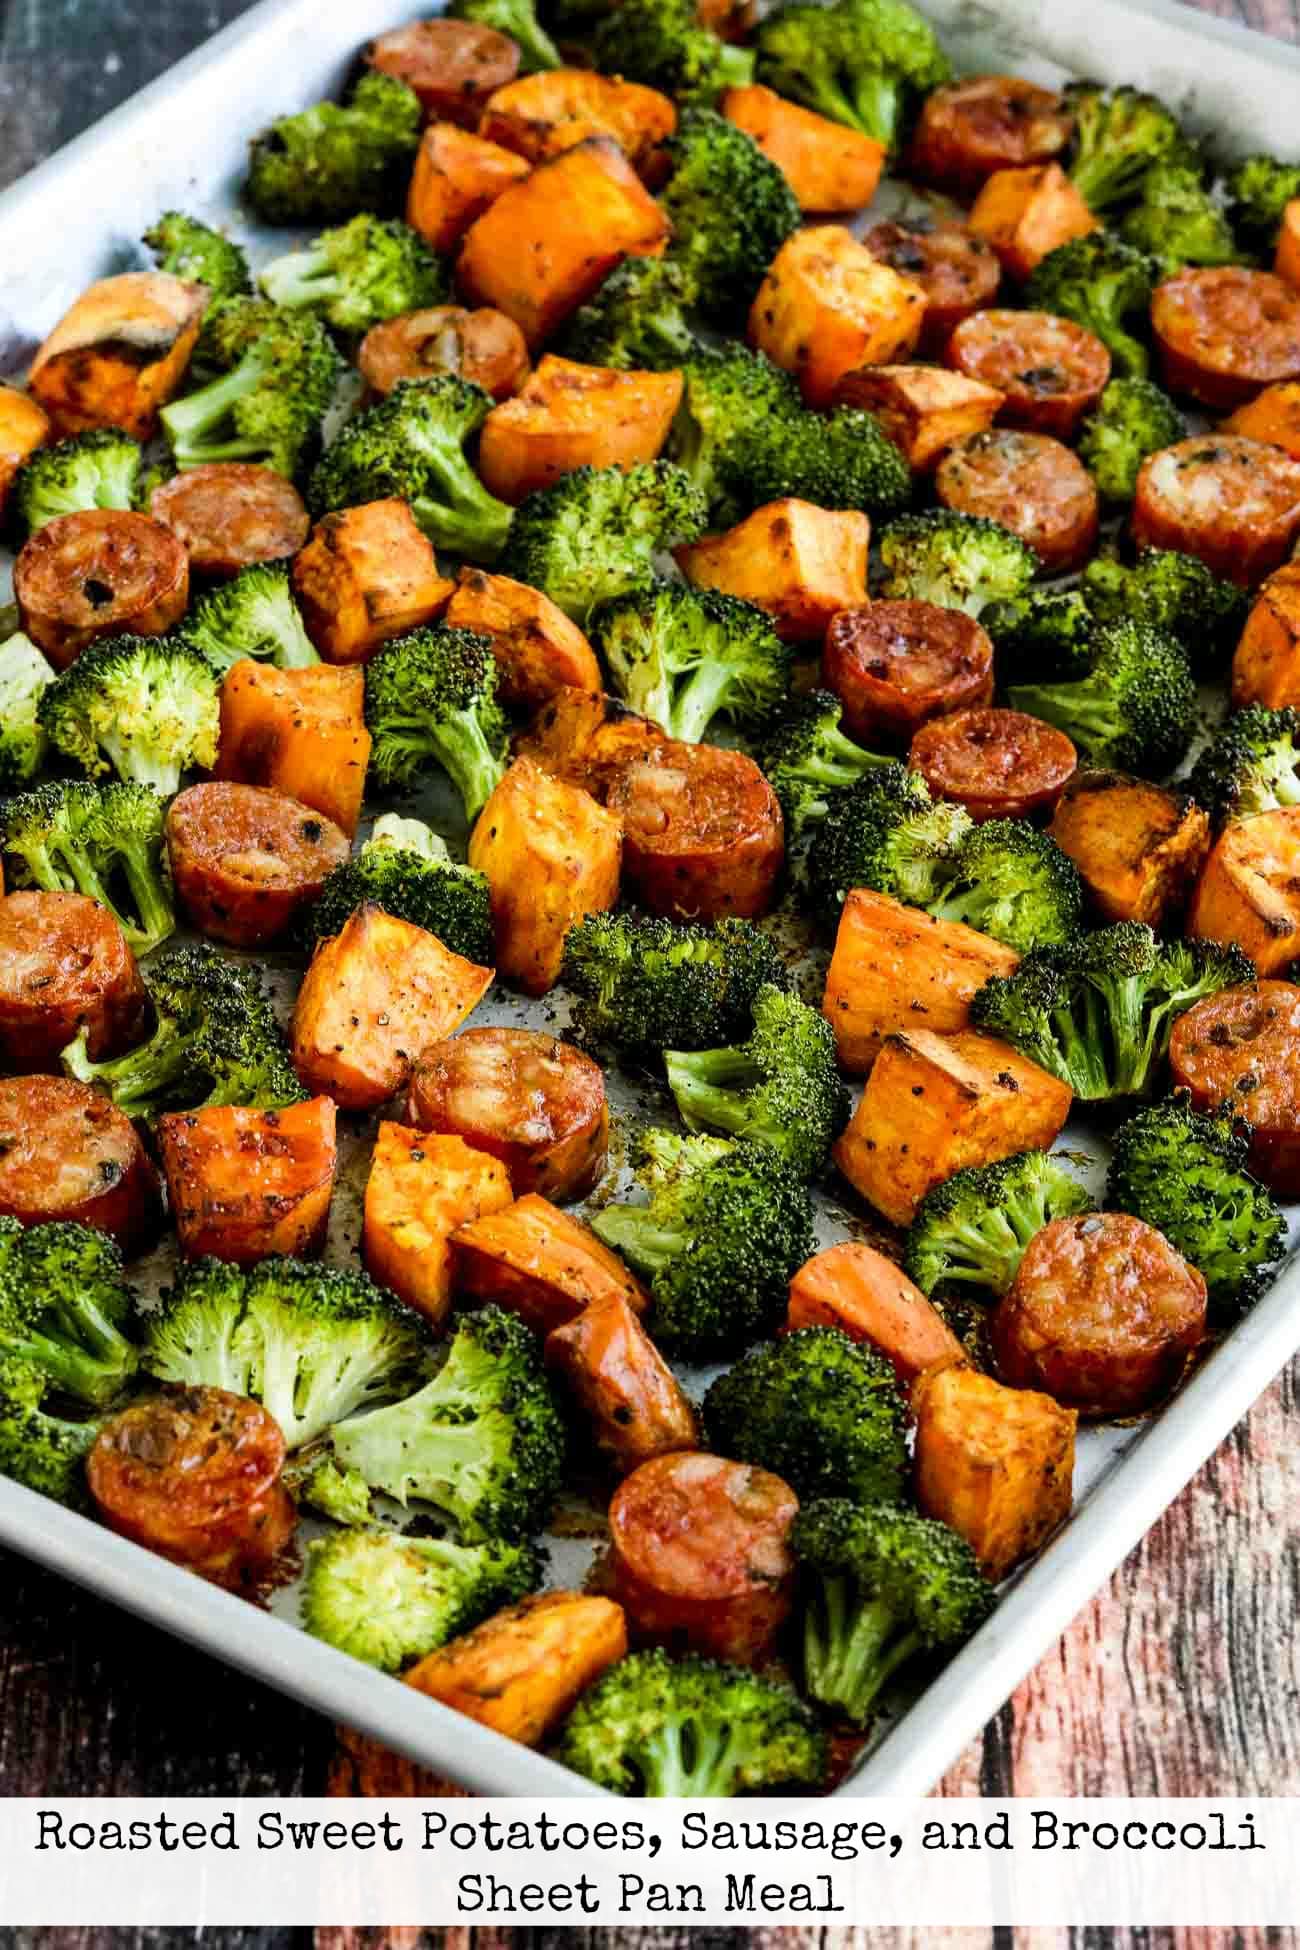 Title photo for Roasted Sweet Potatoes, Sausage, and Broccoli Sheet Pan Meal